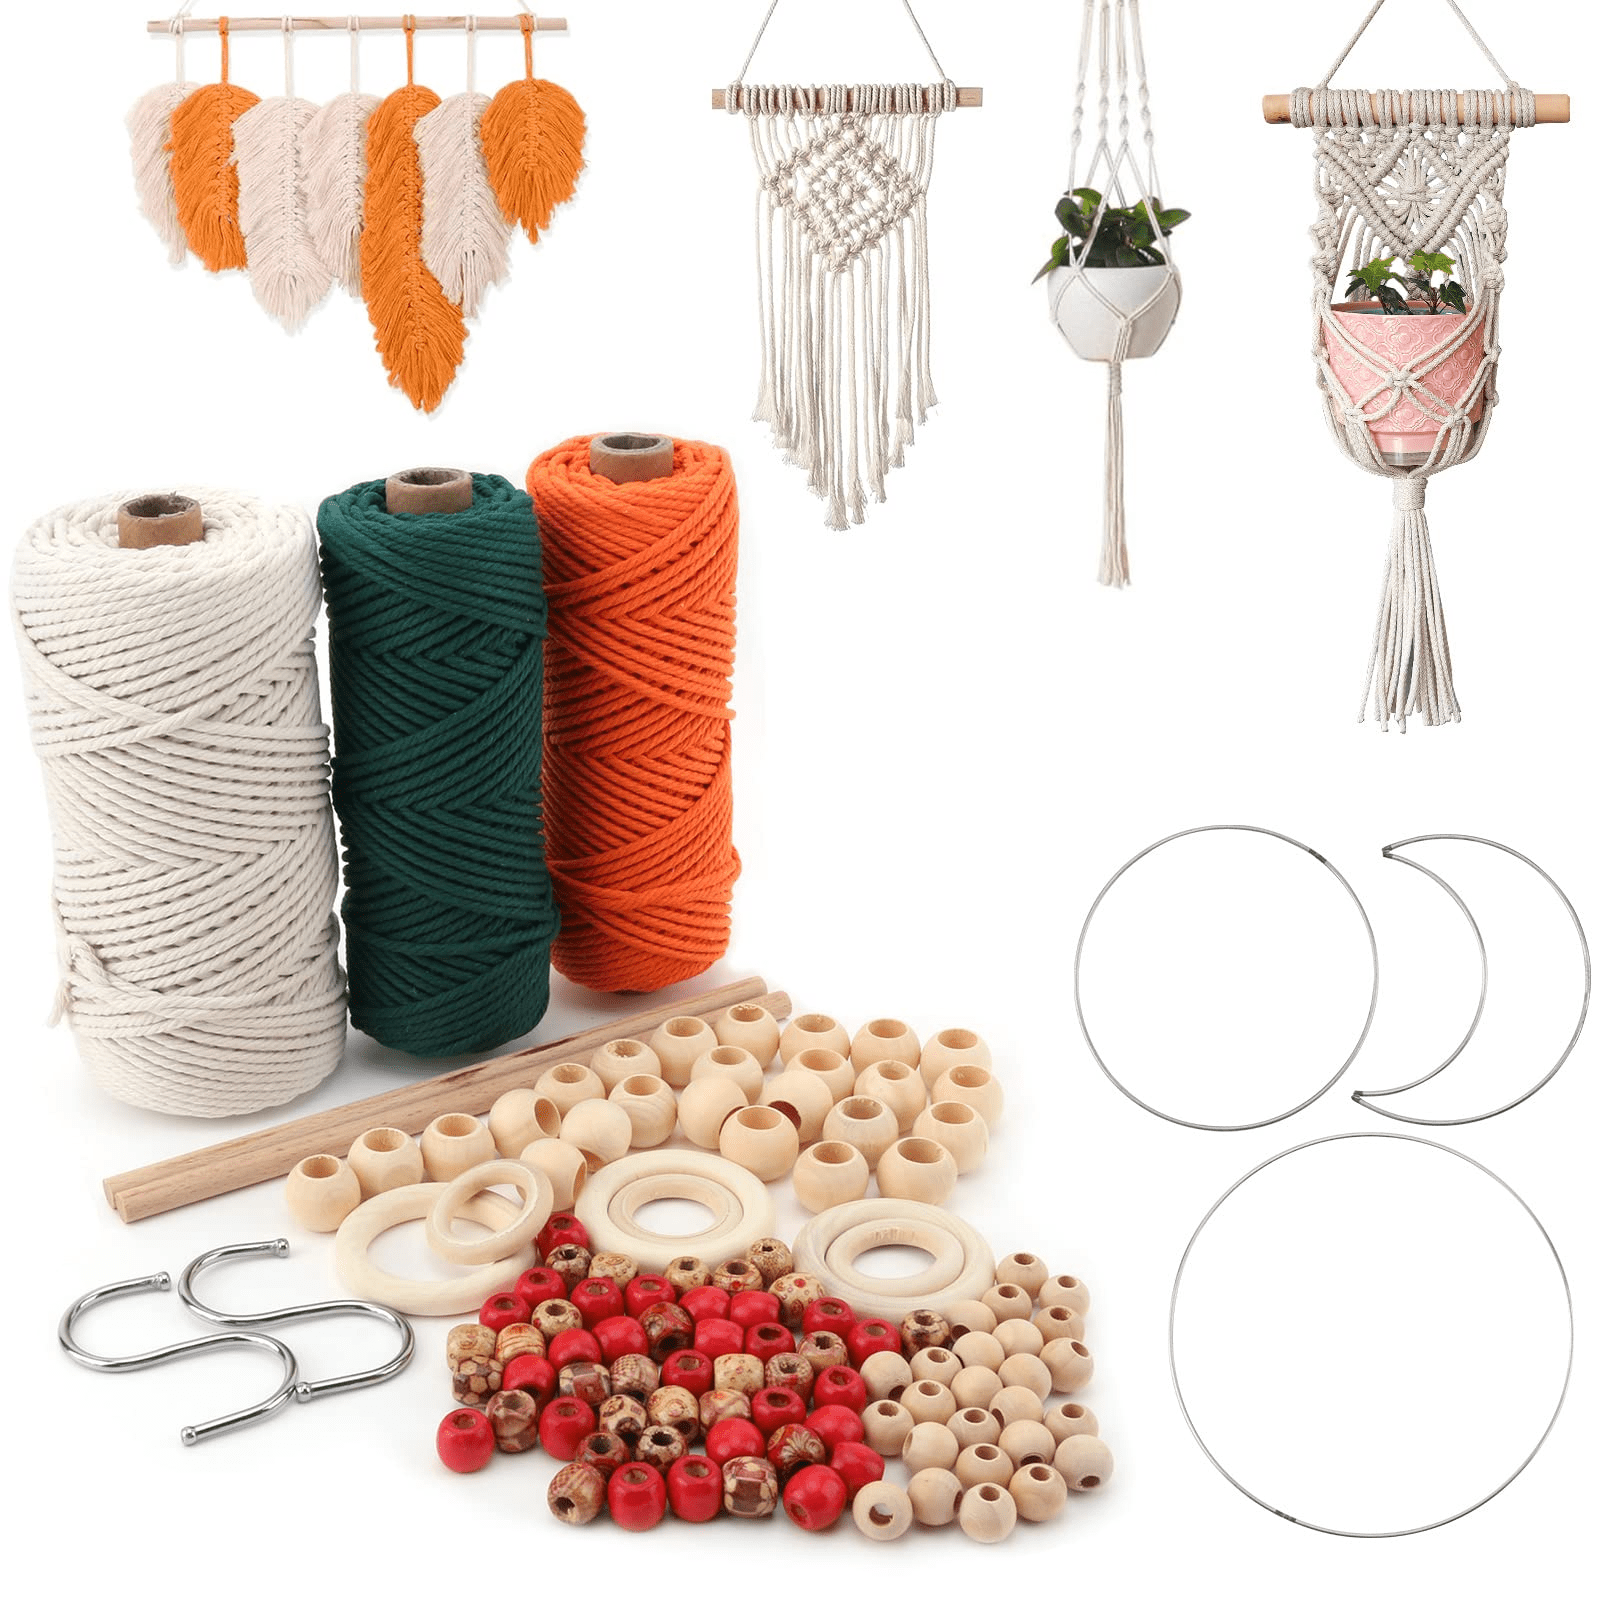 Macrame Kit, Makes 3 DIY Plant Hangers for Teens & Adult Beginners, Craft Supplies for Boho Art Project-3 Custom Color Macrame Cord, Wooden Rings 